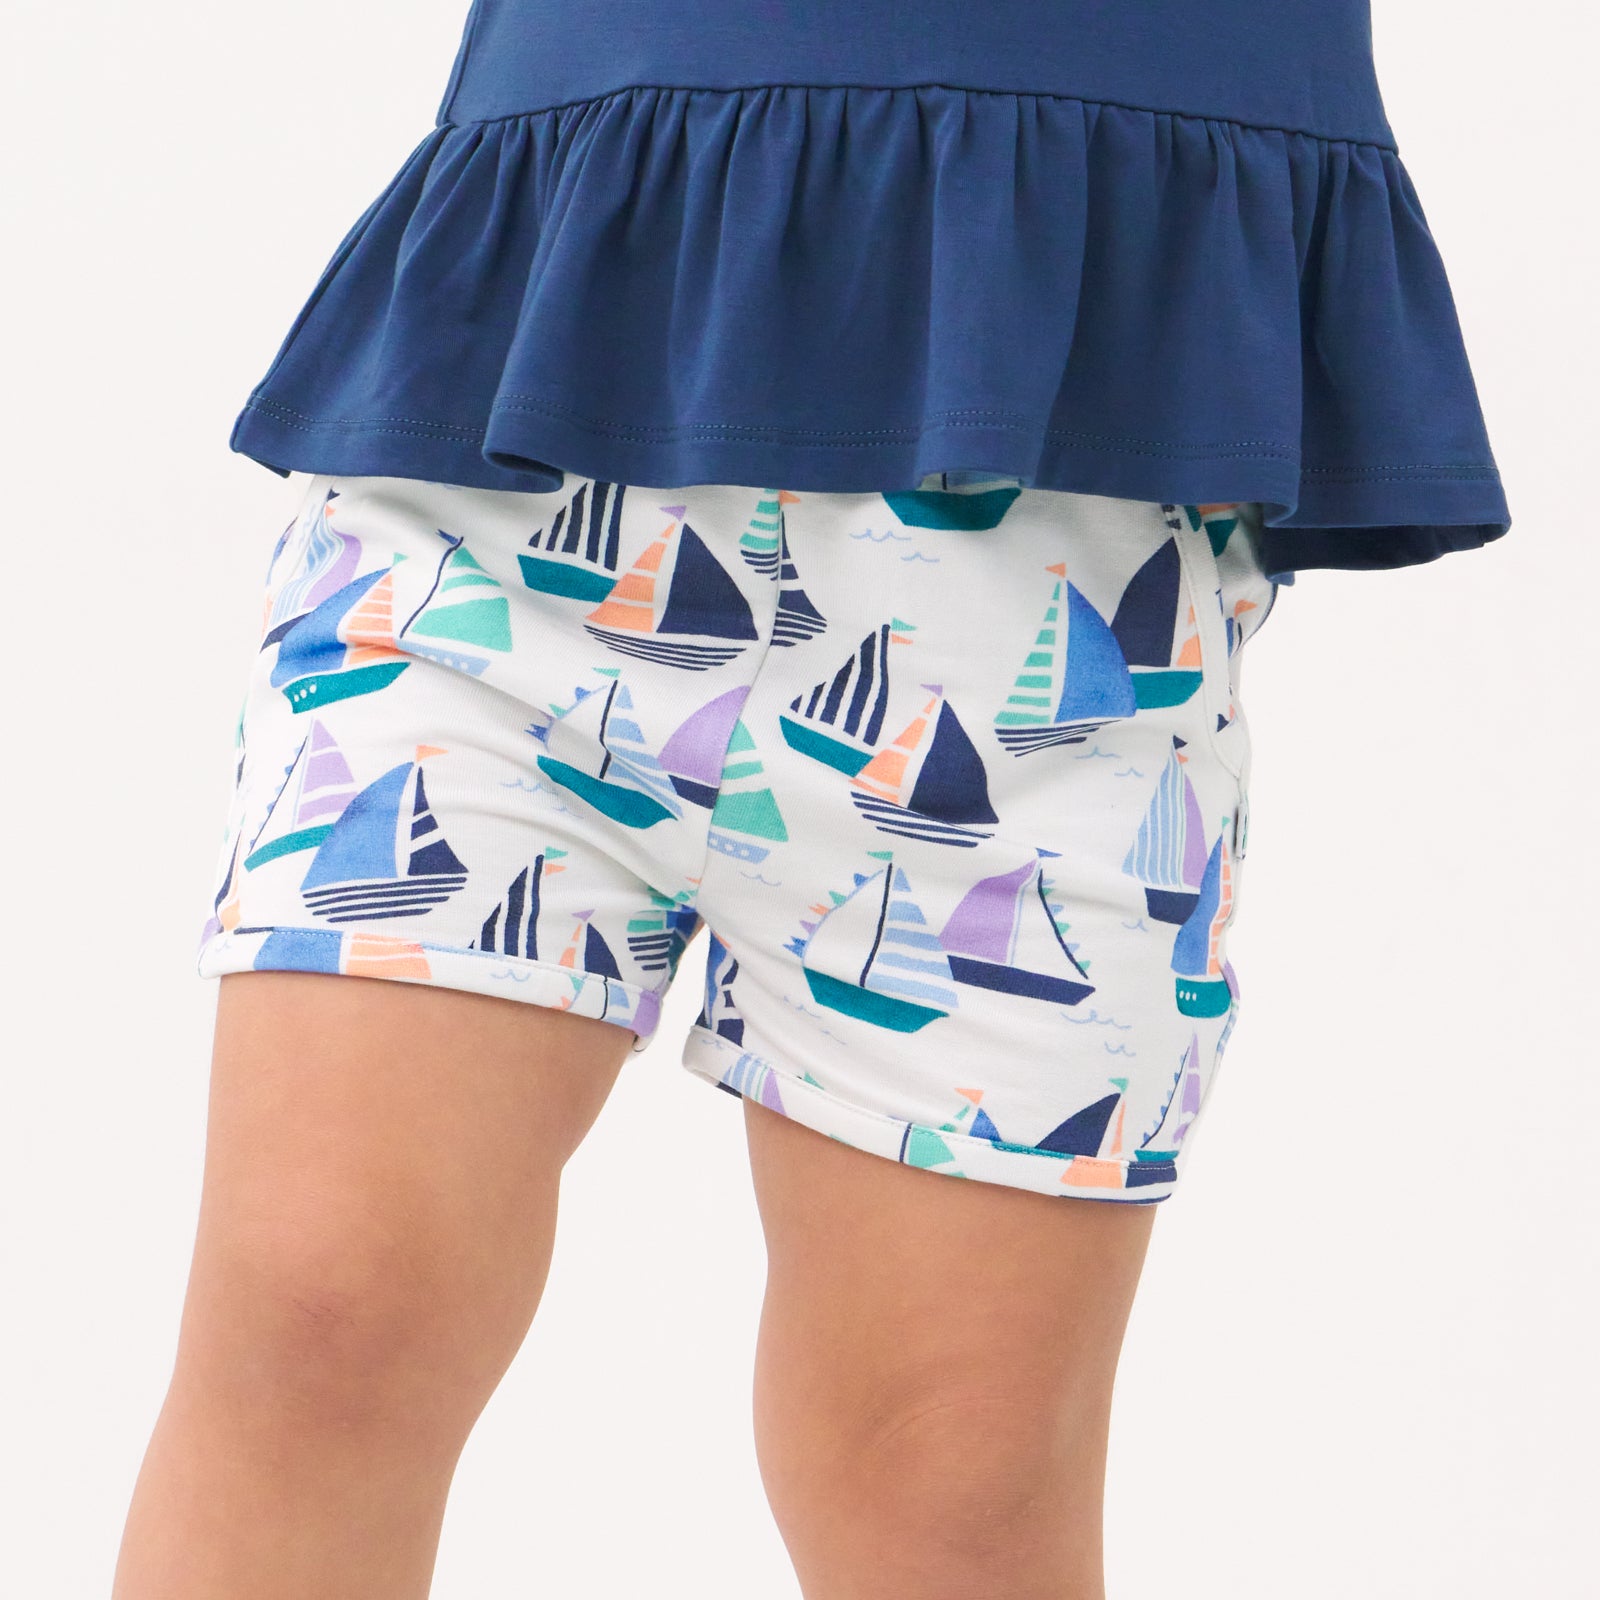 Close up image of a child wearing Seas the Day dolphin shorts